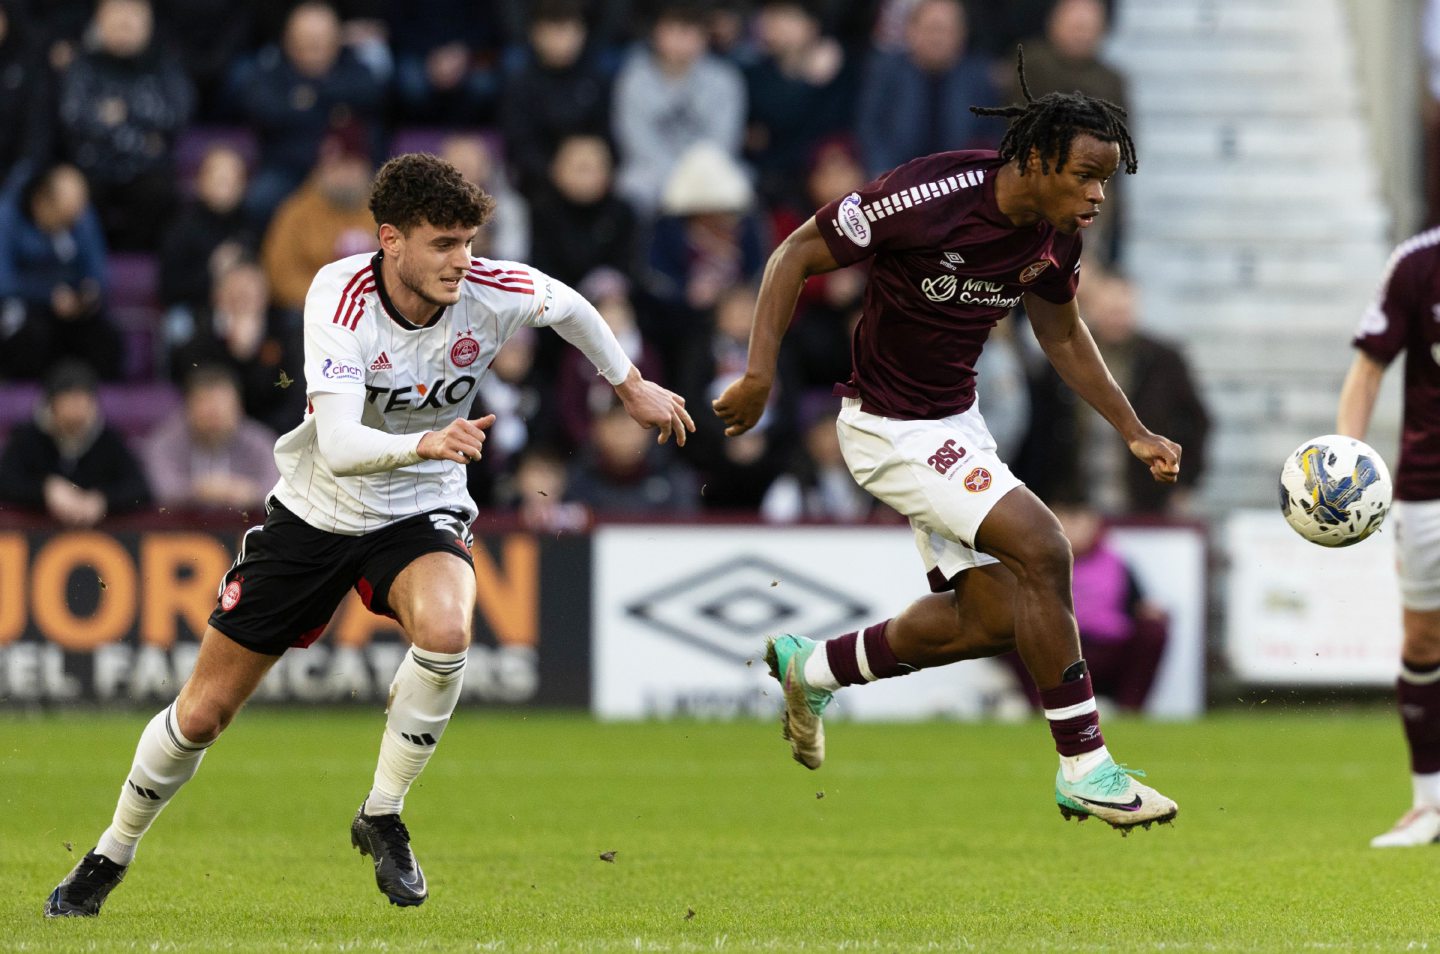 Hearts' Dexter Lembikisa and Aberdeen's Dante Polvara in action at Tynecastle. Image: SNS